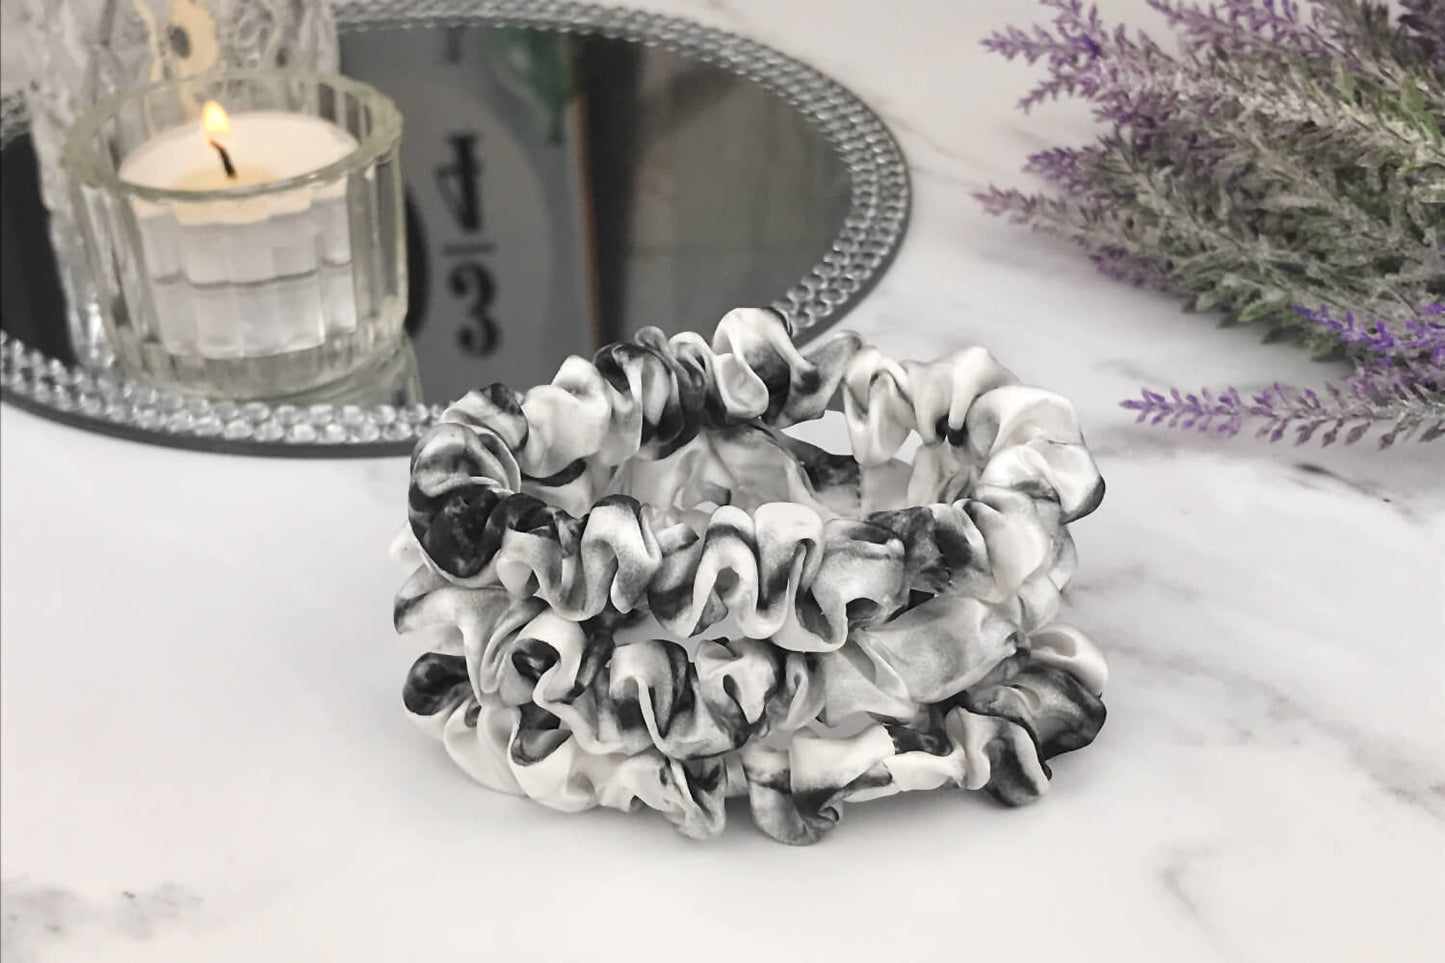 Celestial Silk skinny white marble silk scrunchies stacked on marble counter with lavender plant and a candle in the background